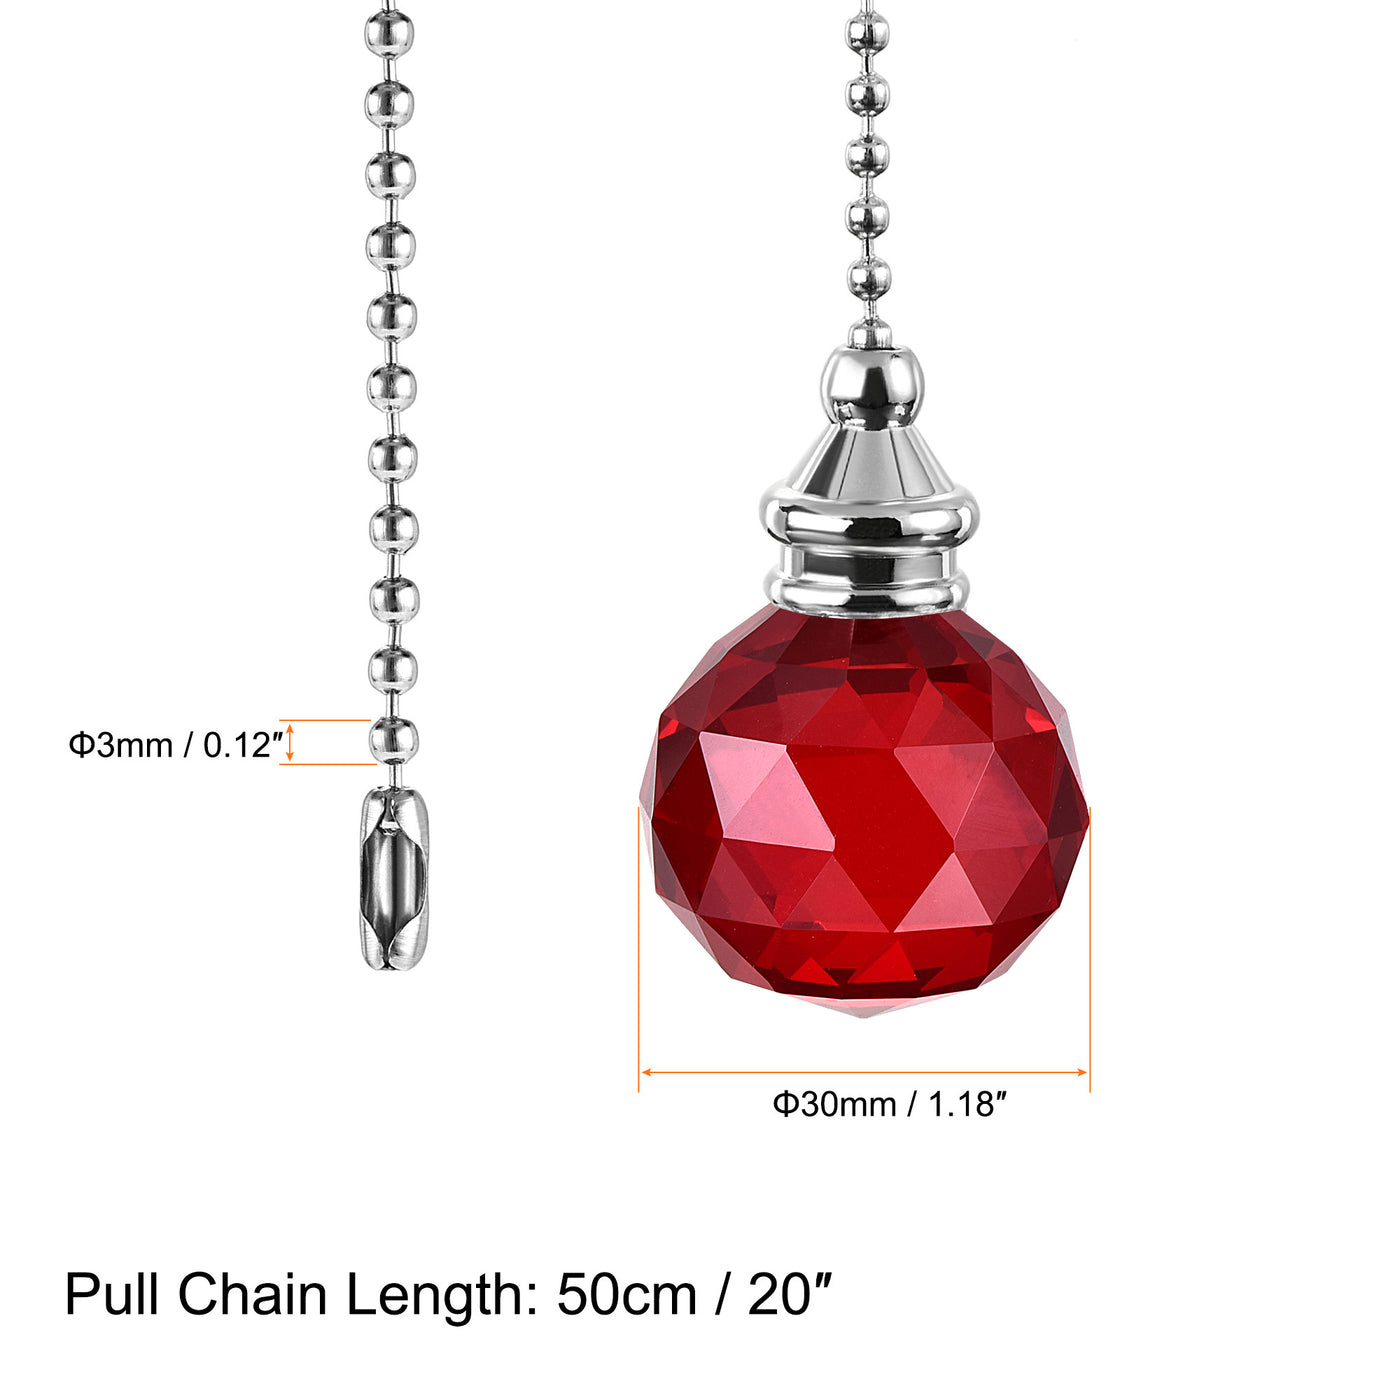 uxcell Uxcell Ceiling Fan Pull Chain, 20 Inch Nickel Finish Chain Ornament Extension, 30mm Red Crystal Ball Pendant 2Pcs